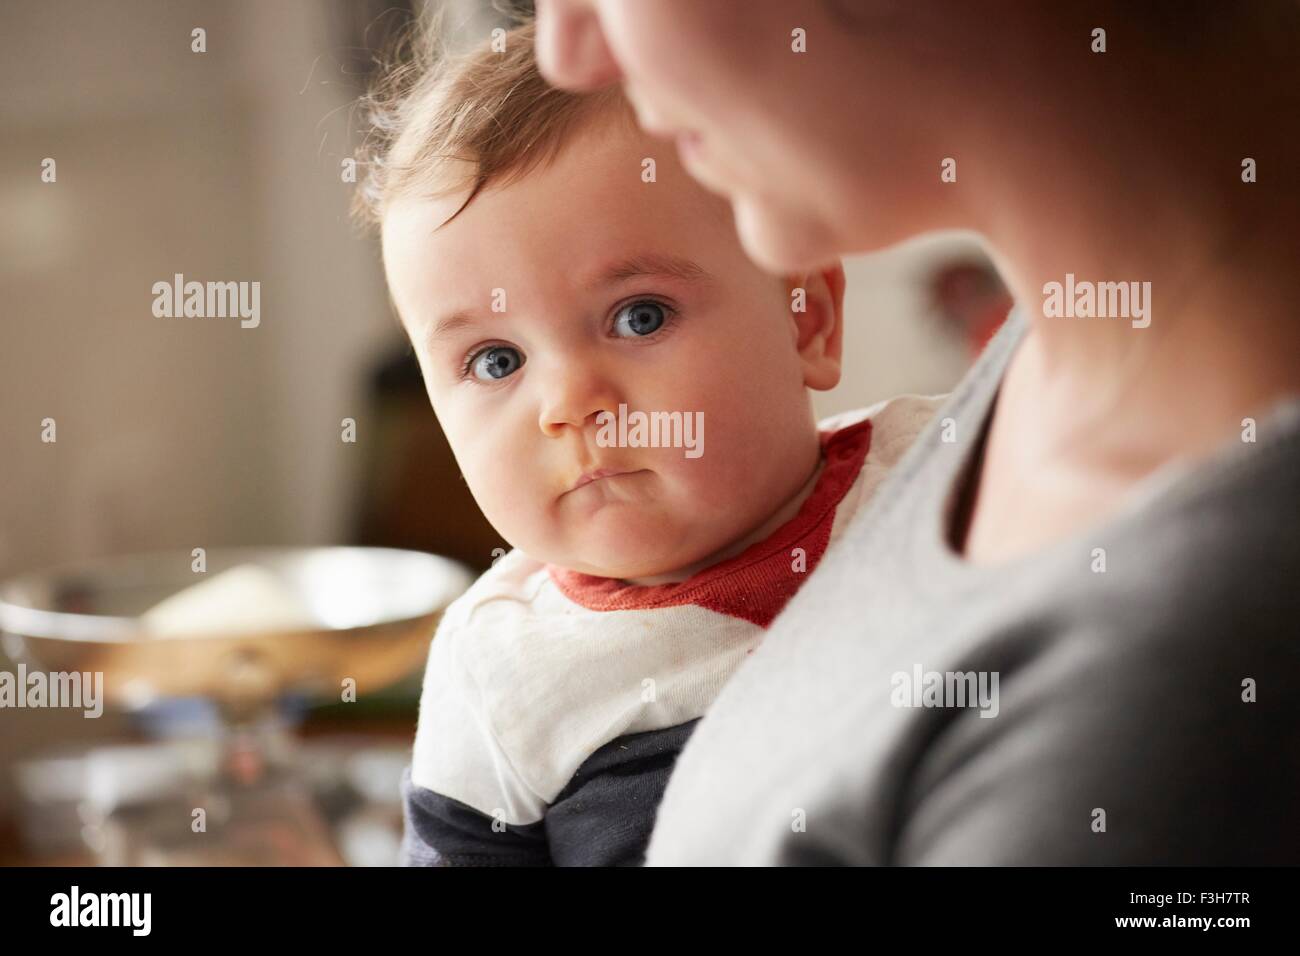 Mother carrying baby boy in kitchen Stock Photo